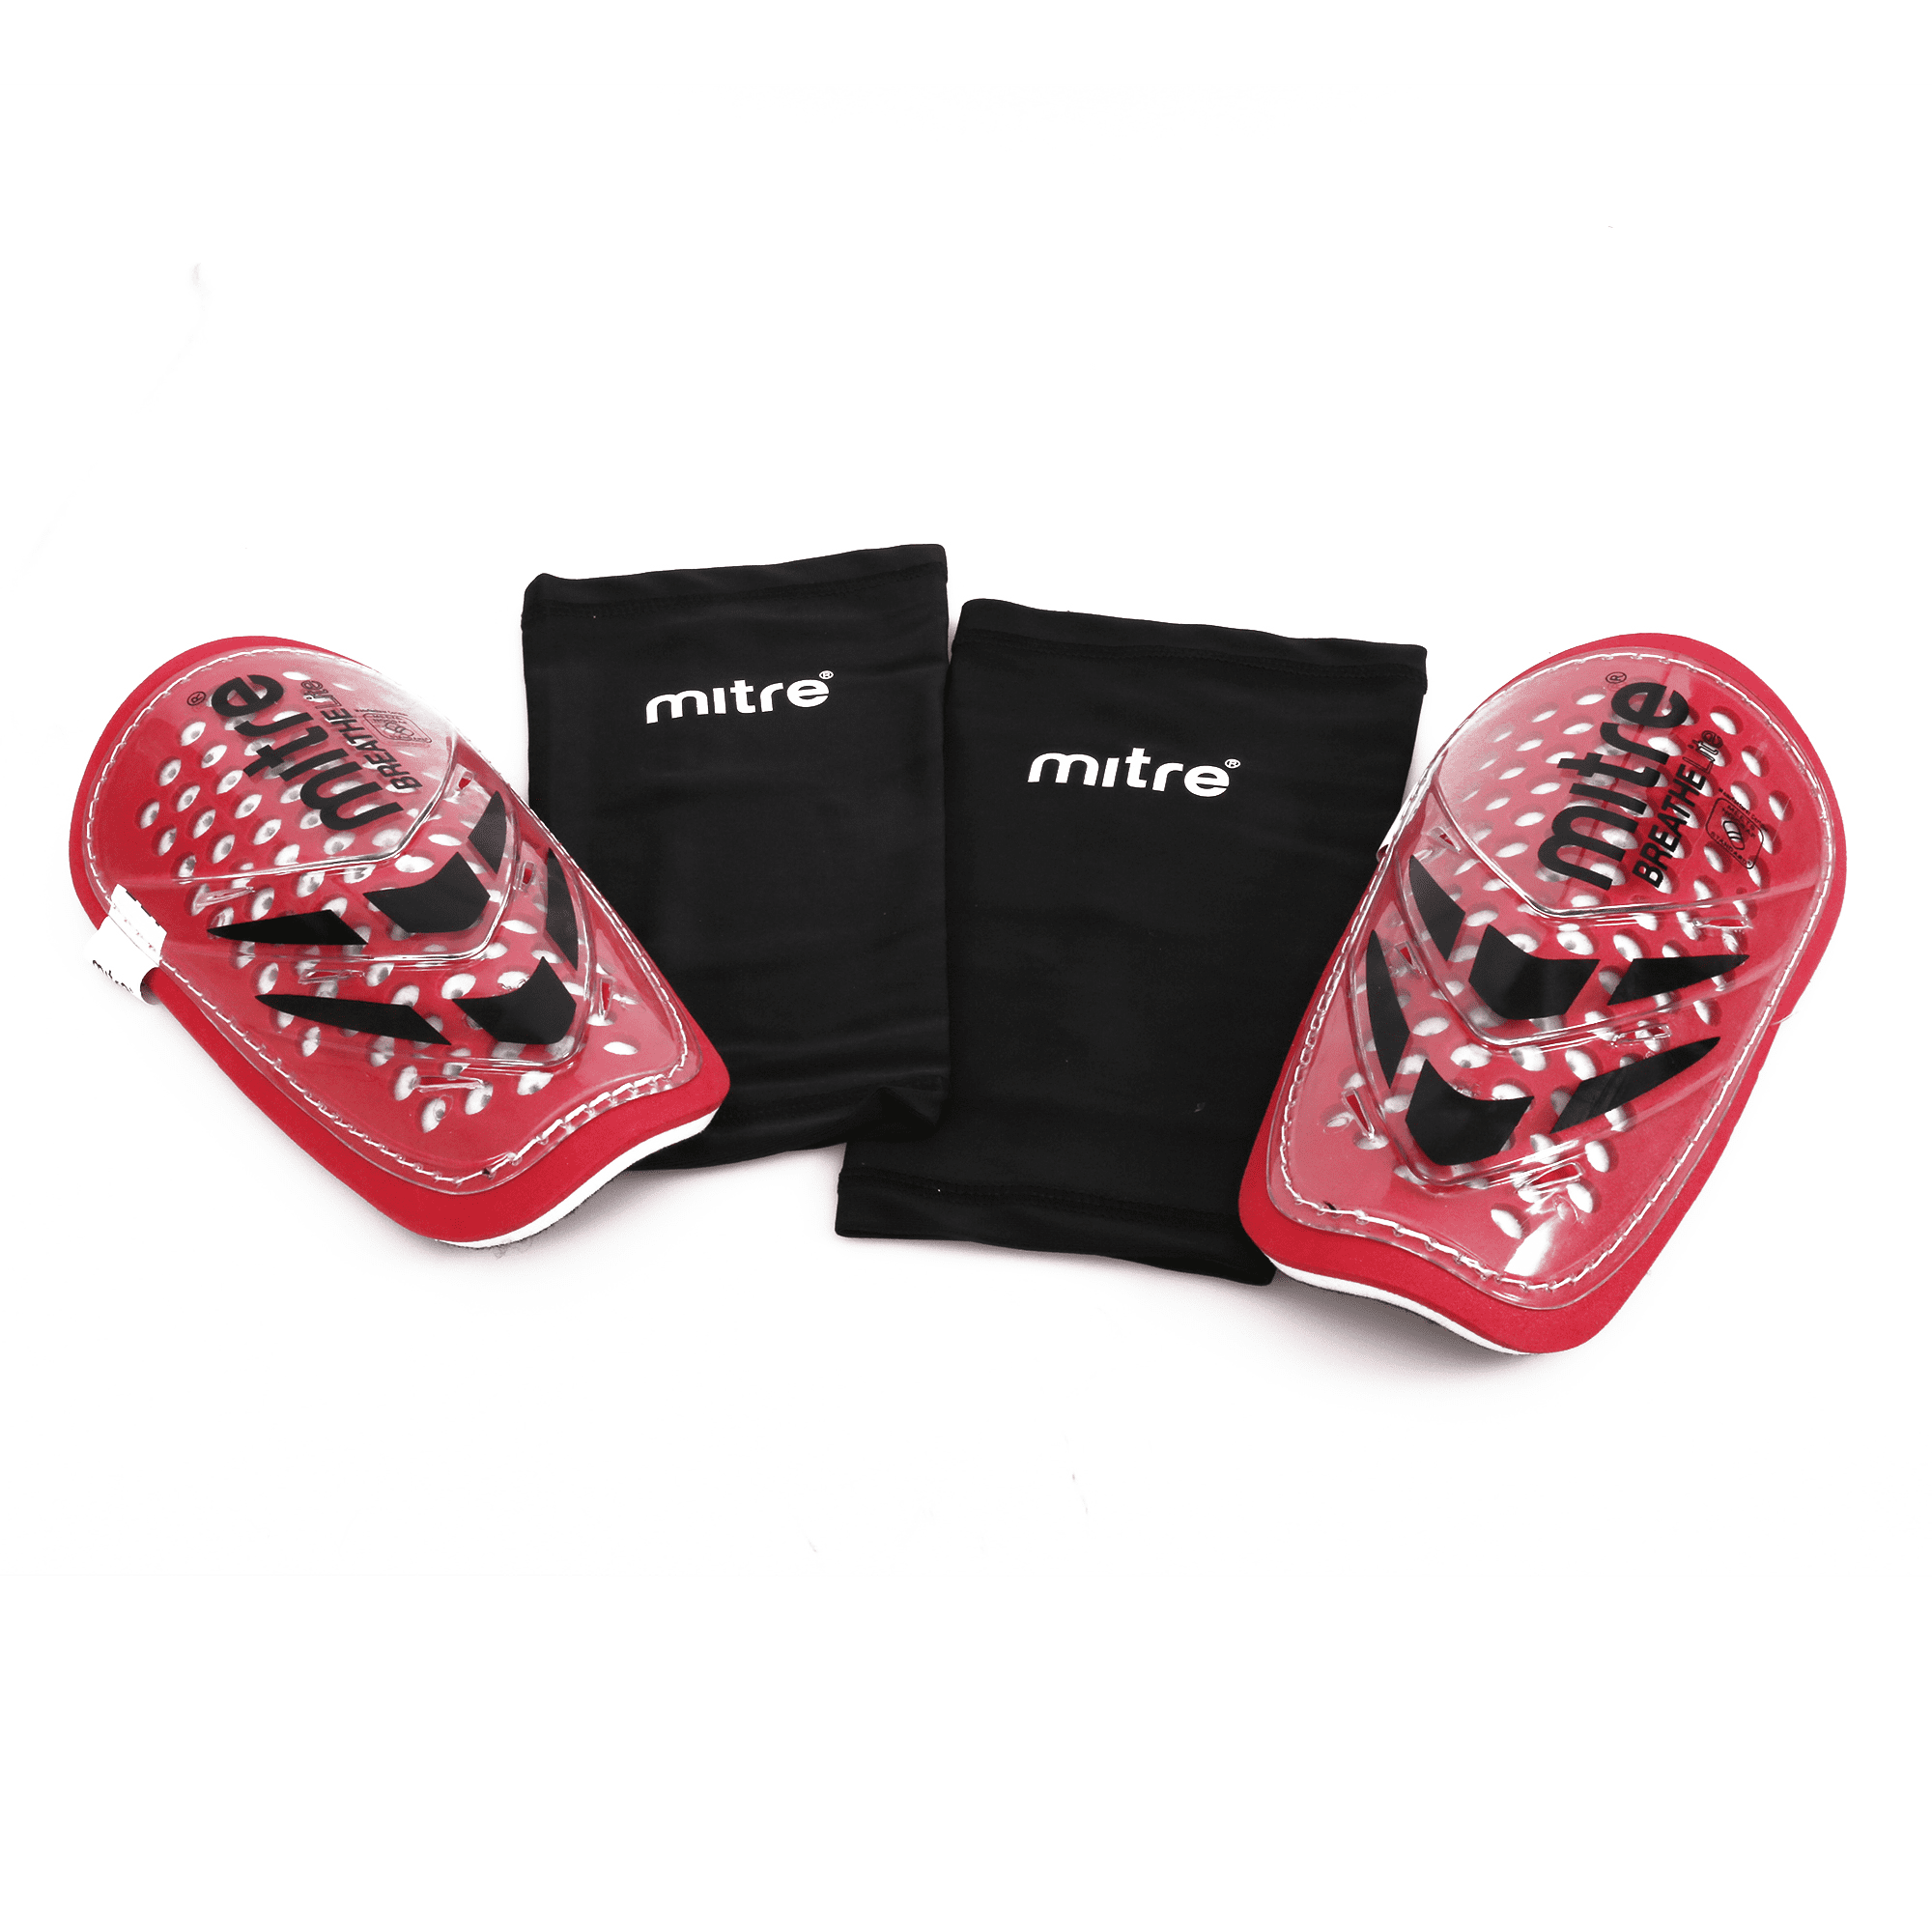 Details about   NEW Mitre Breathlite Shin Guard soccer for kids under 4"ft tall red   B-3 